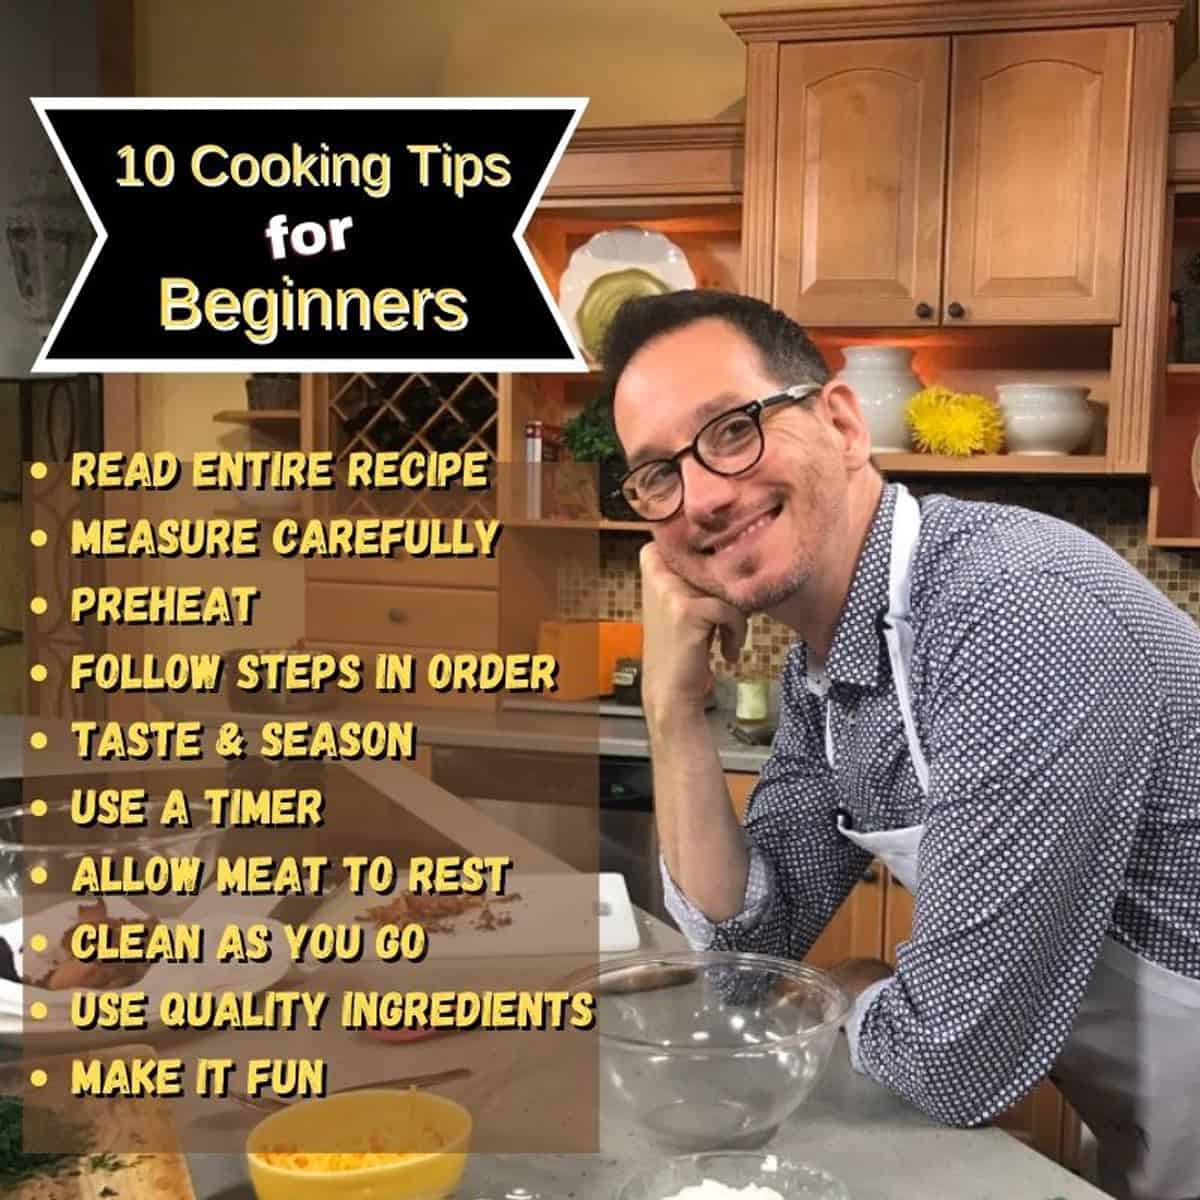 15 Best Cooking Tips - Easy, Simple Cooking Tips For Beginners